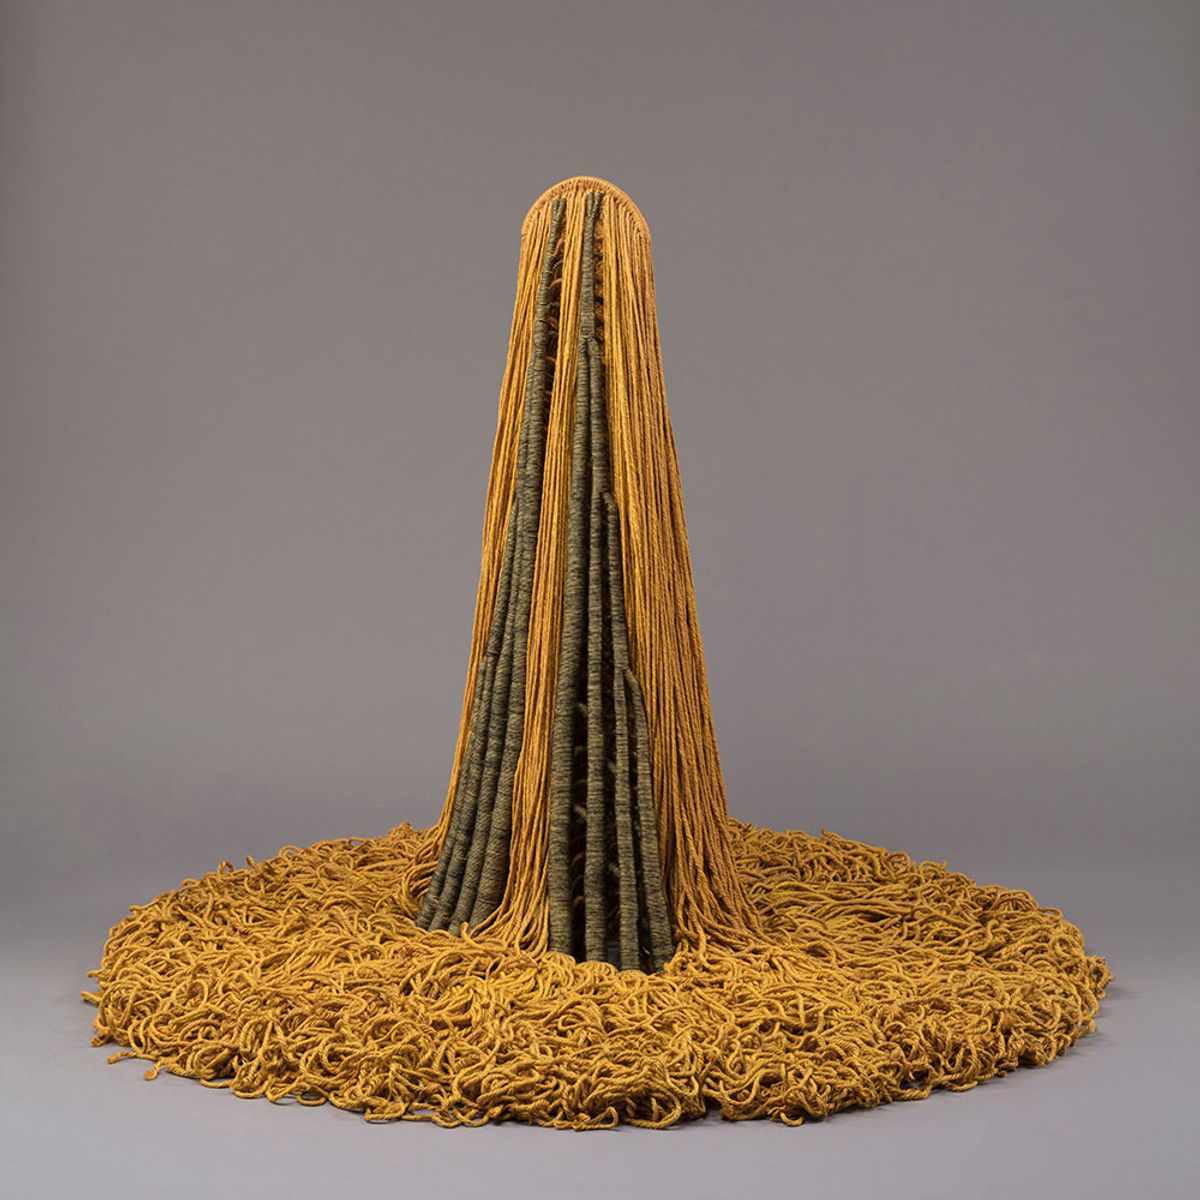 Claire Zeisler, Free Standing Yellow (1968) Art Institute of Chicago; Gift of David Lawrence Fagen, Richard Rees Fagen, and Edward A. Fagen in memory of Mildred and Abel Fagen